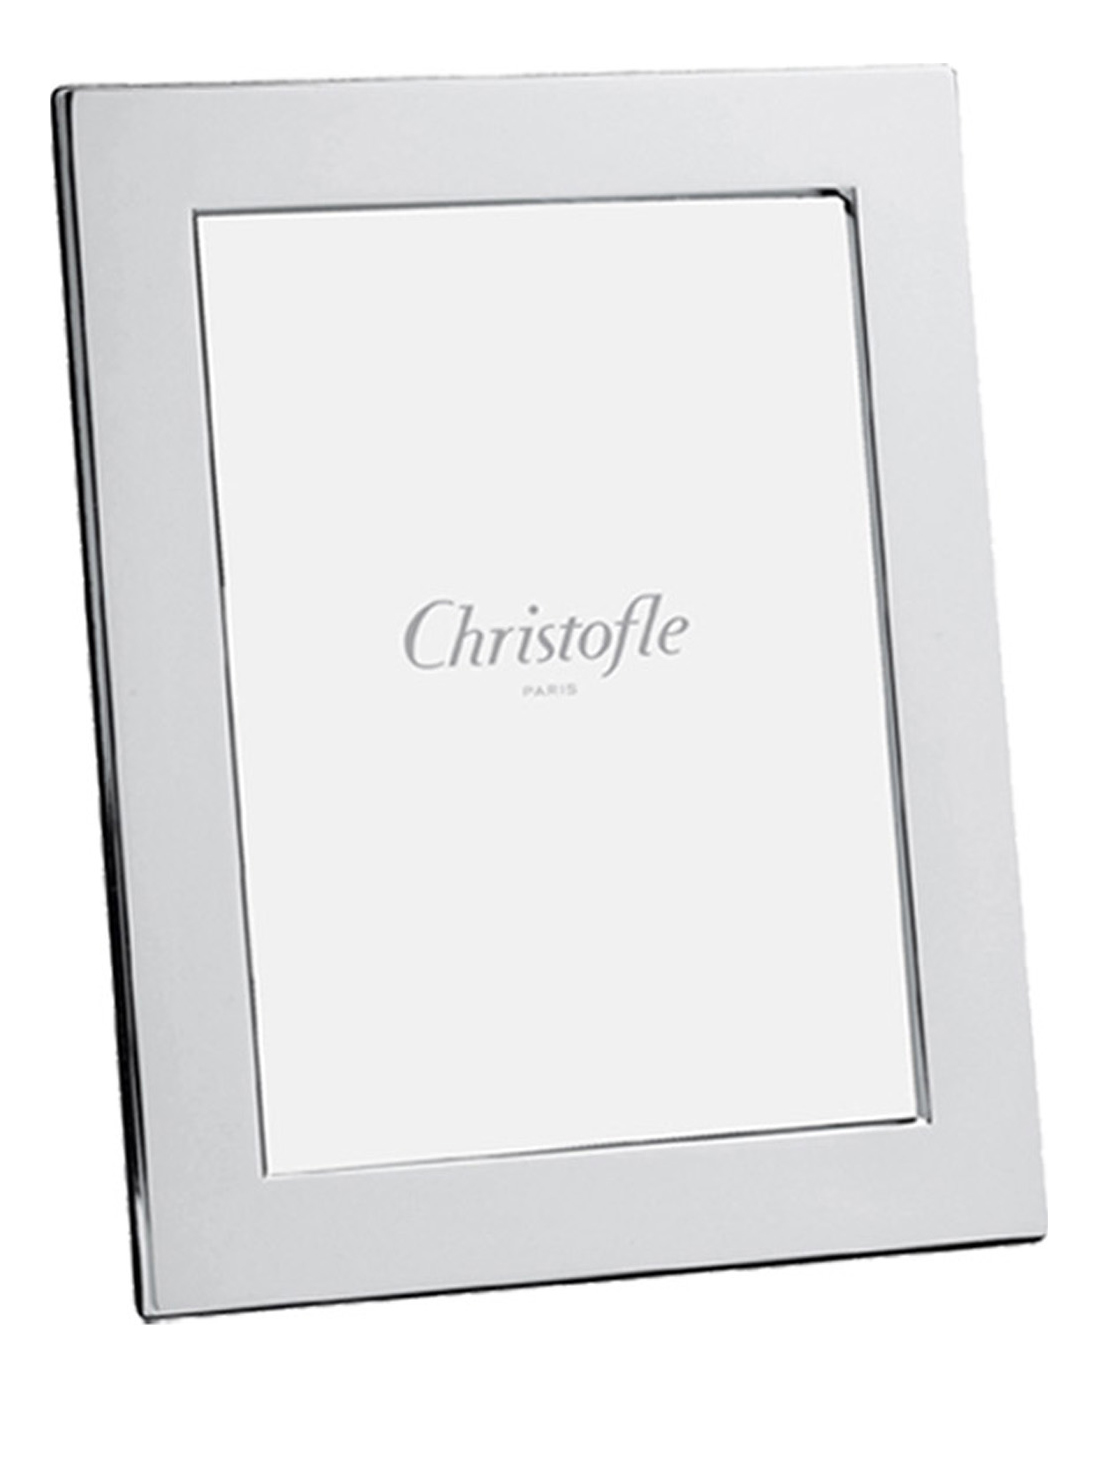 Sterling silver picture frames - Christofle